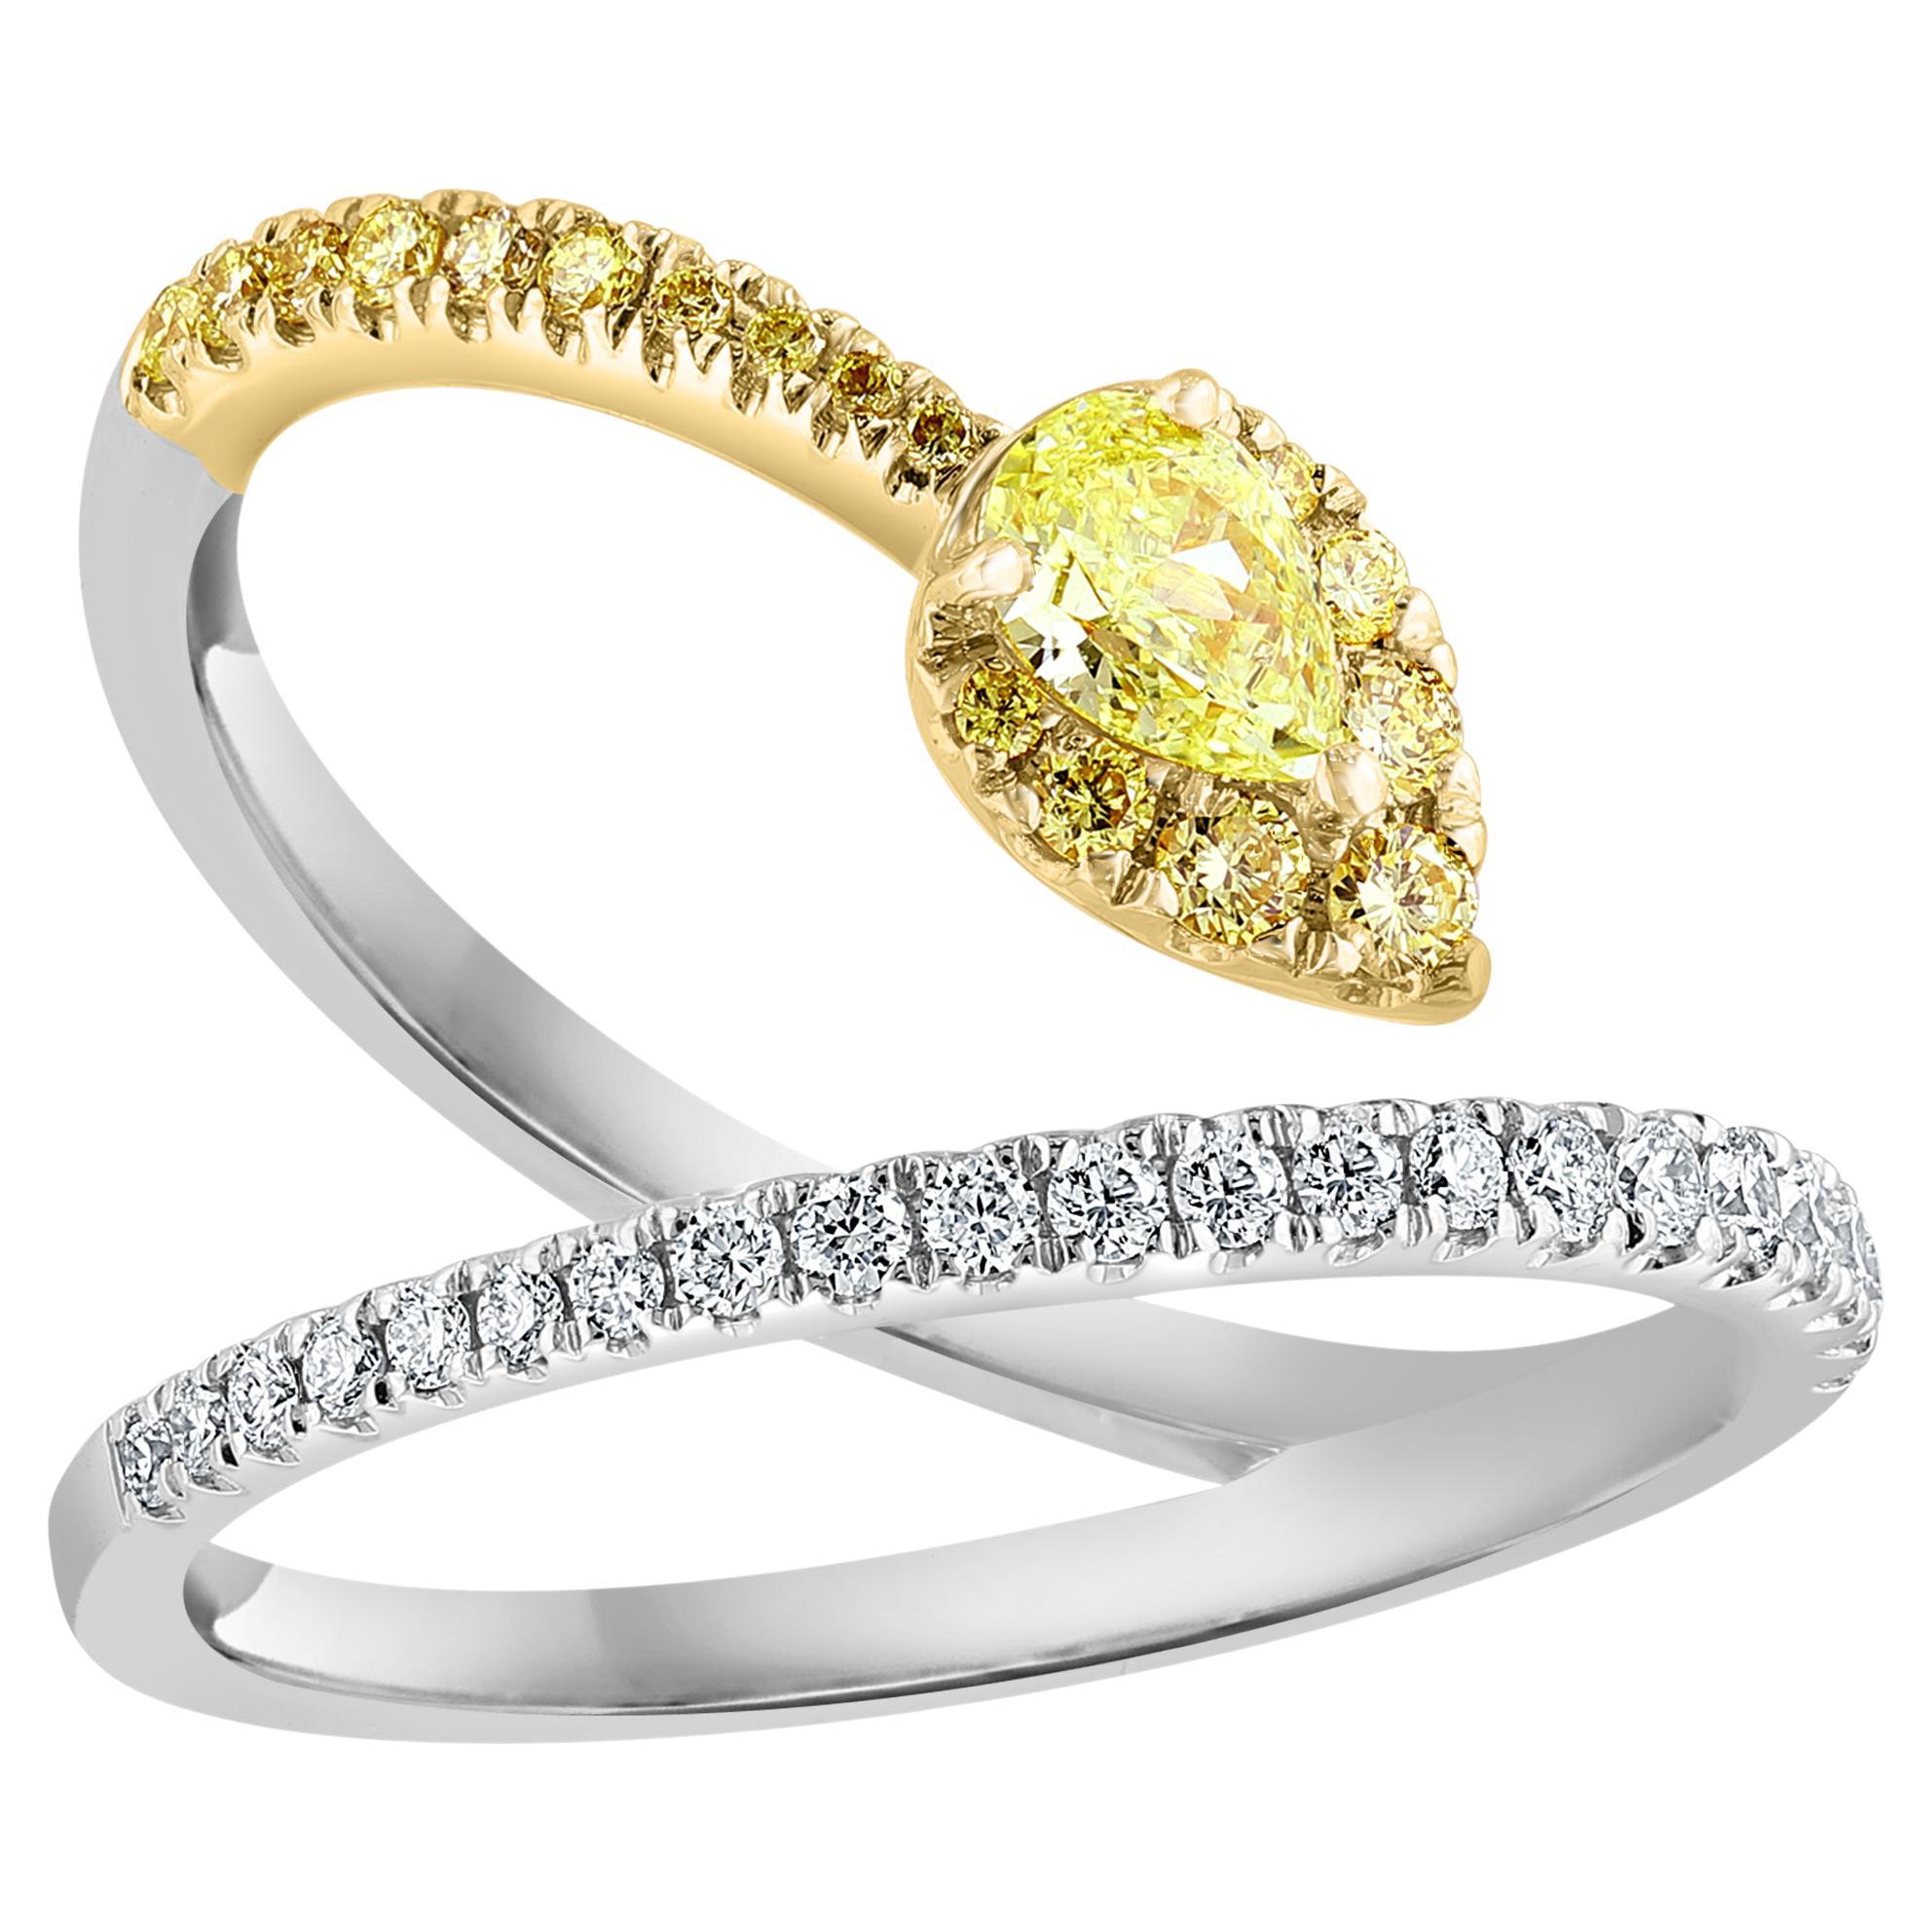 0.30 Carat Pear Shape Yellow Diamond Ring in 18K Mix Gold For Sale